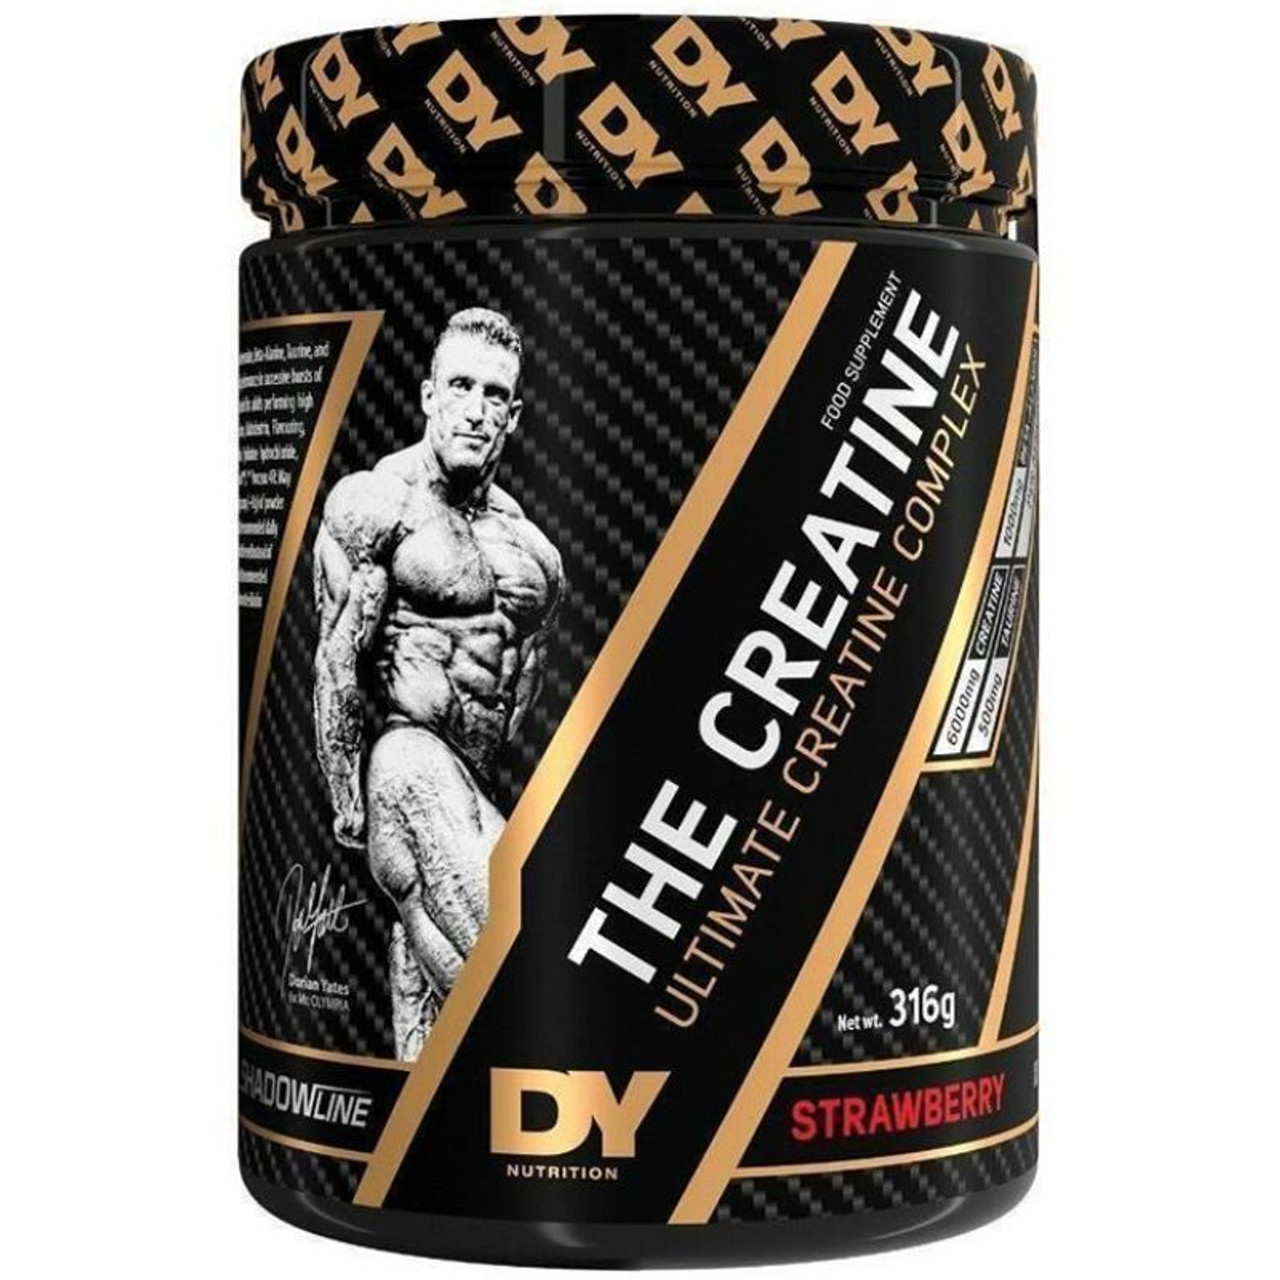 The Creatine DY Nutrition 316g Strawberry